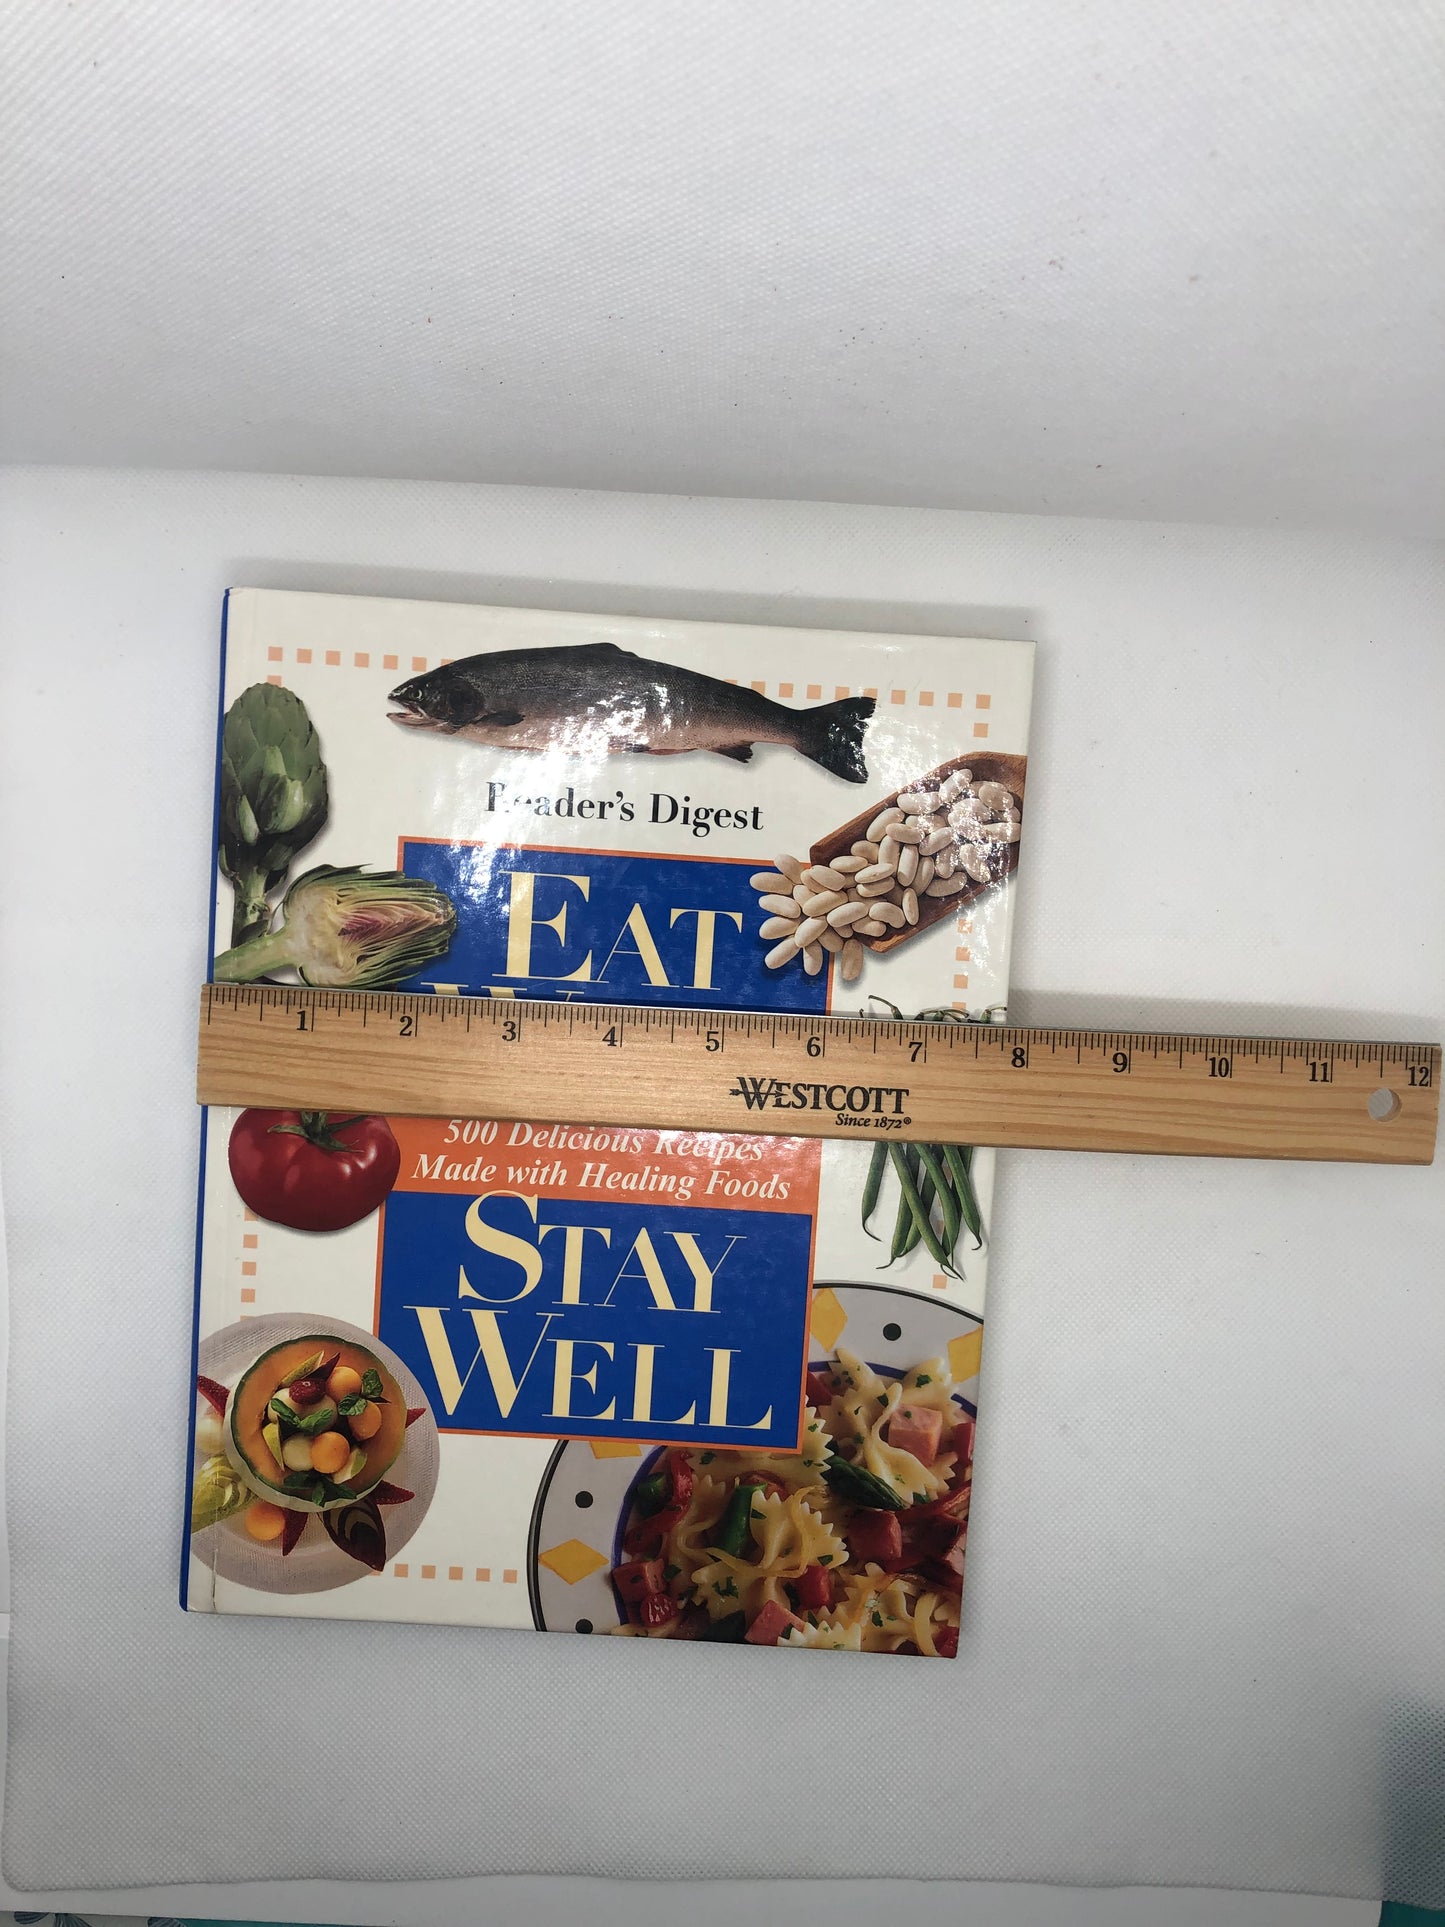 Reader's Digest - Eat Well Stay Well (in hardcover)